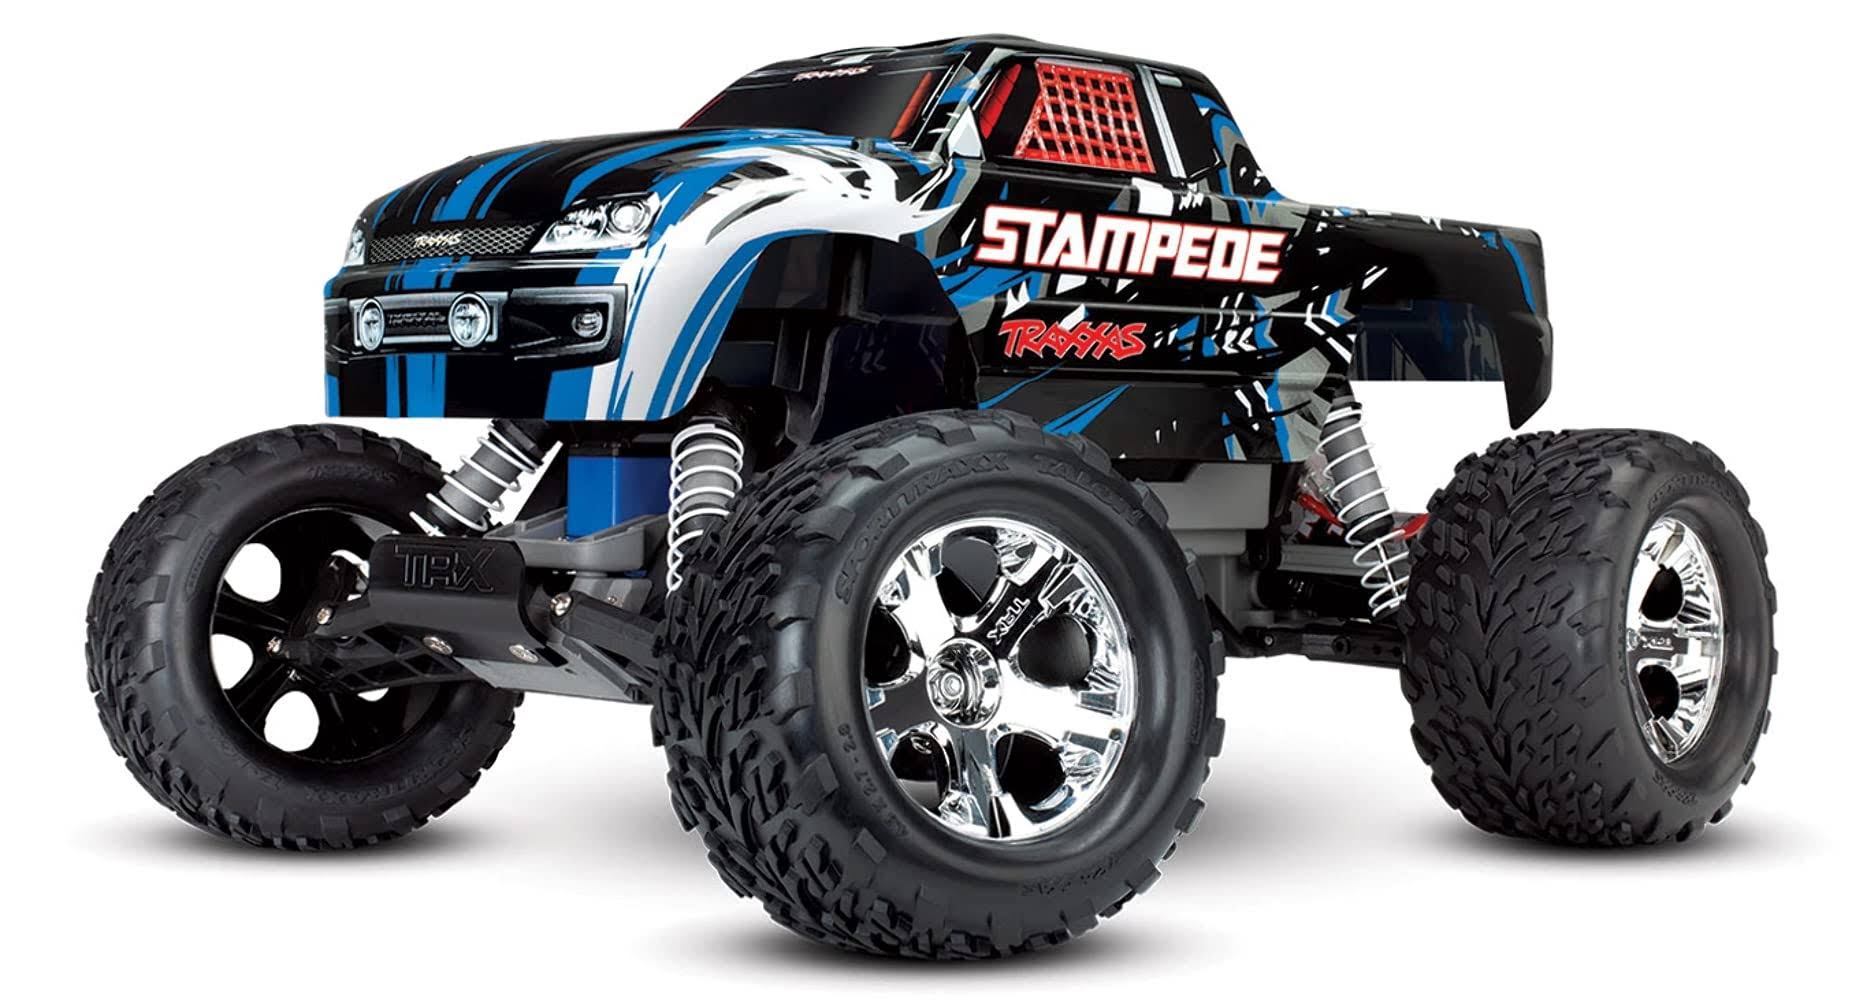 Traxxas Stampede Monster Truck RTR, 36054-1